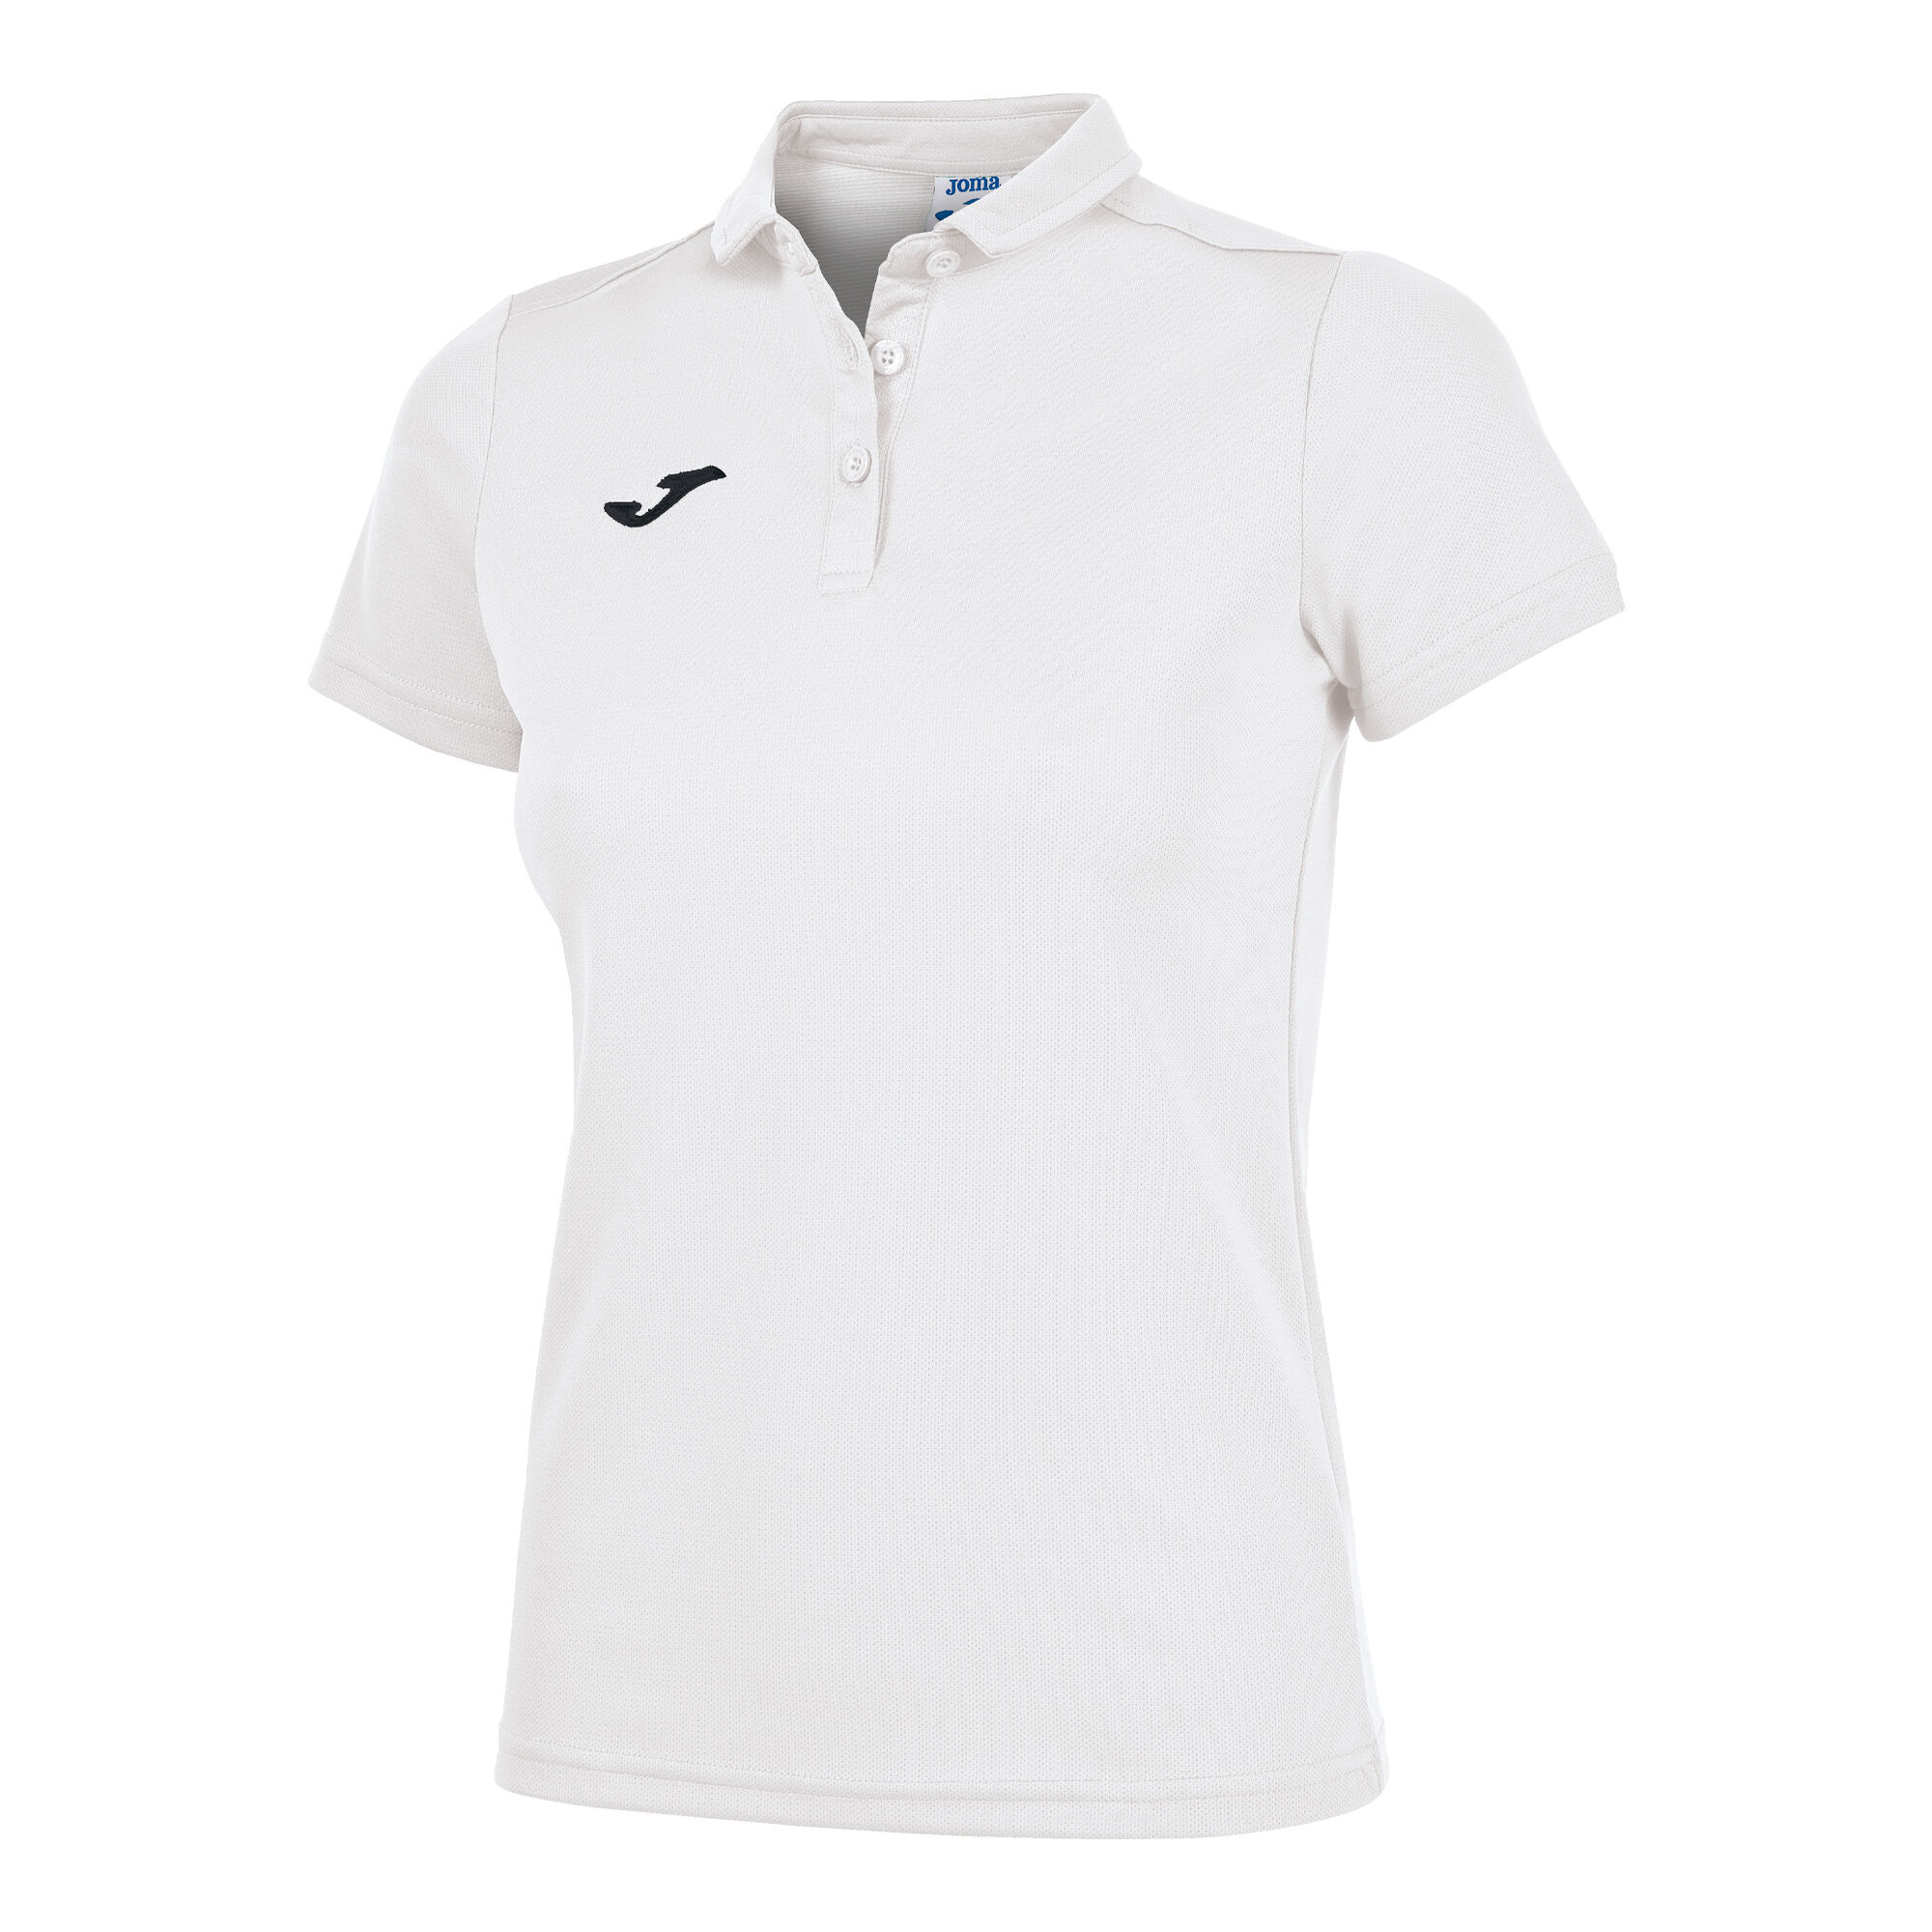 POLO MANCHES COURTES FEMME HOBBY BLANC